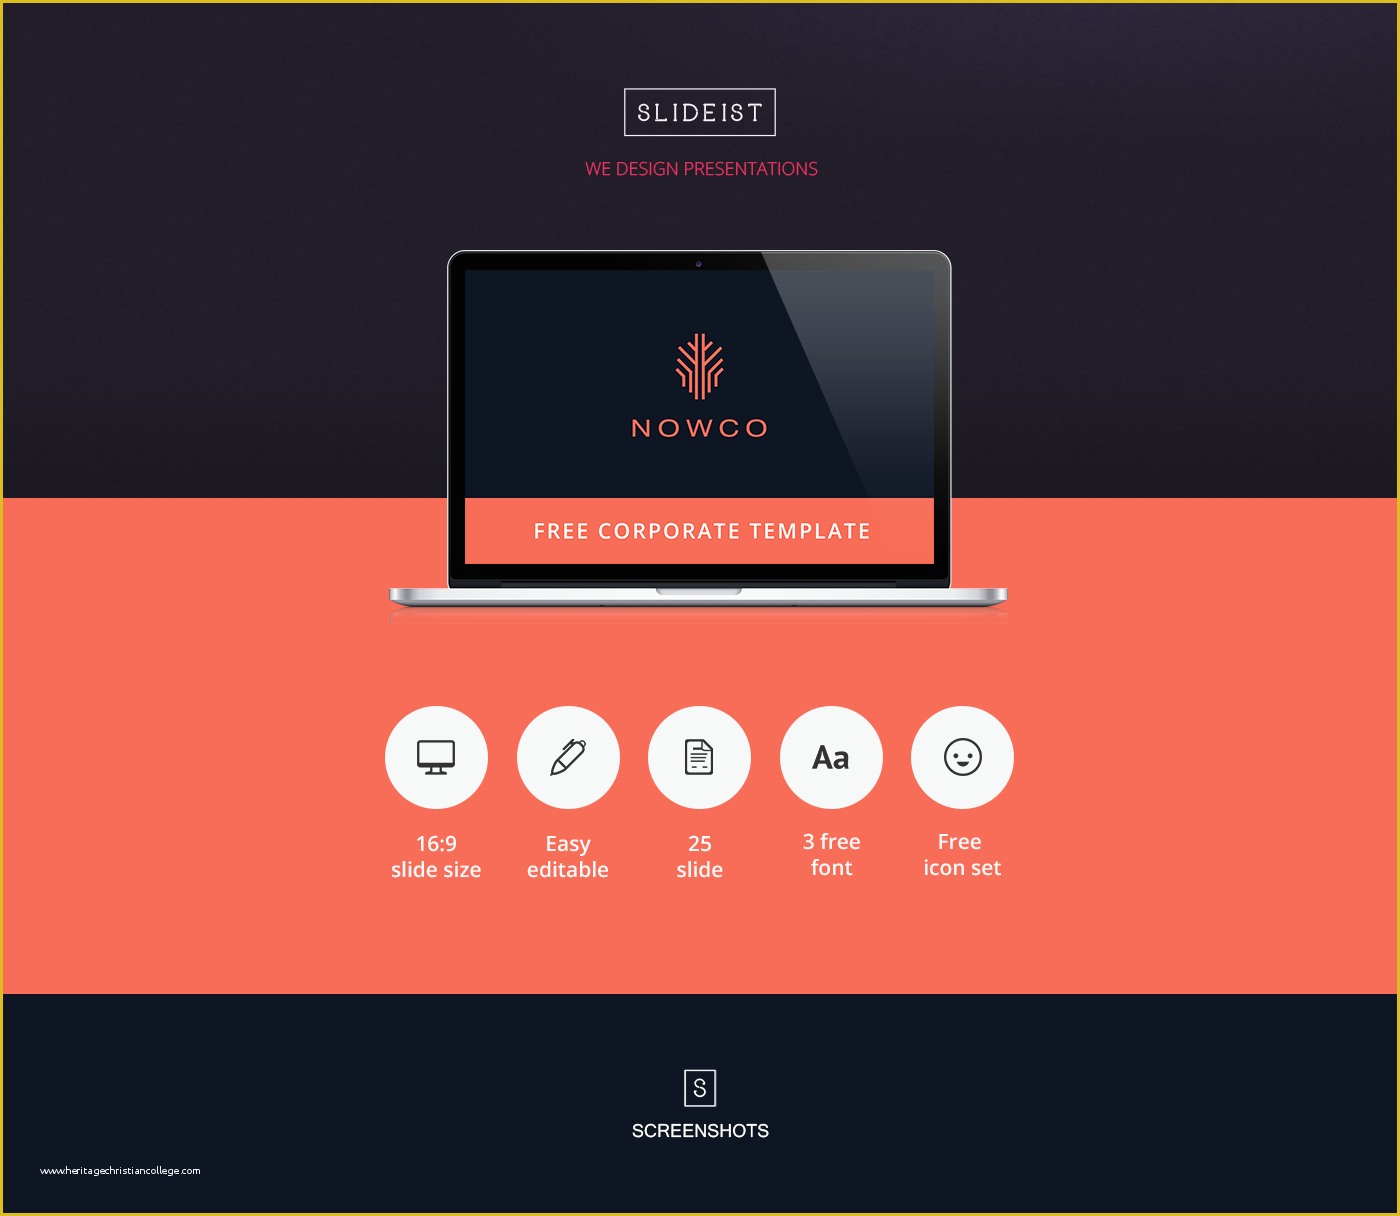 Free Online Powerpoint Templates Of nowco Free Powerpoint Presentation Template On Behance